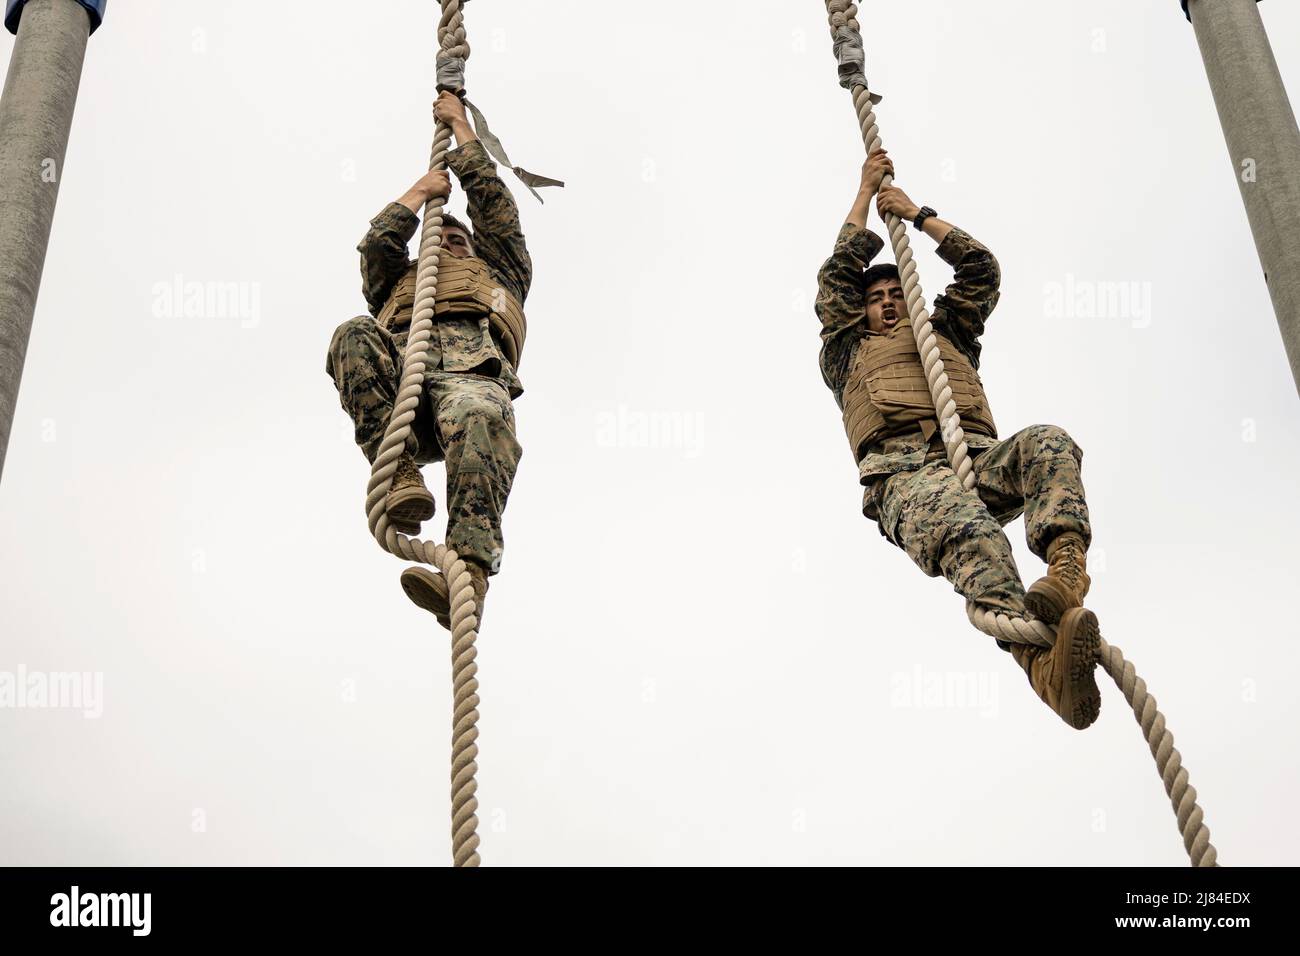 Apr 22, 2021 - Camp Kinser, Okinawa, Japan - U.S. Marine Corps Cpl. Isaac Weissend, a military working dog handler, left, and Cpl. Carlos Balderrama, a ground electronics telecommunications and information technology systems maintainer, both with Headquarters and Support Battalion, Marine Corps Installations Pacific, climb a rope during the obstacle course as part of a Martial Arts Instructor course at Camp Kinser, Okinawa, Japan, April 22, 2022. The Marines participated in the 15-day MAI course to become instructors and gain the ability to train and advance Marines in the Marine Corps Martial Stock Photo